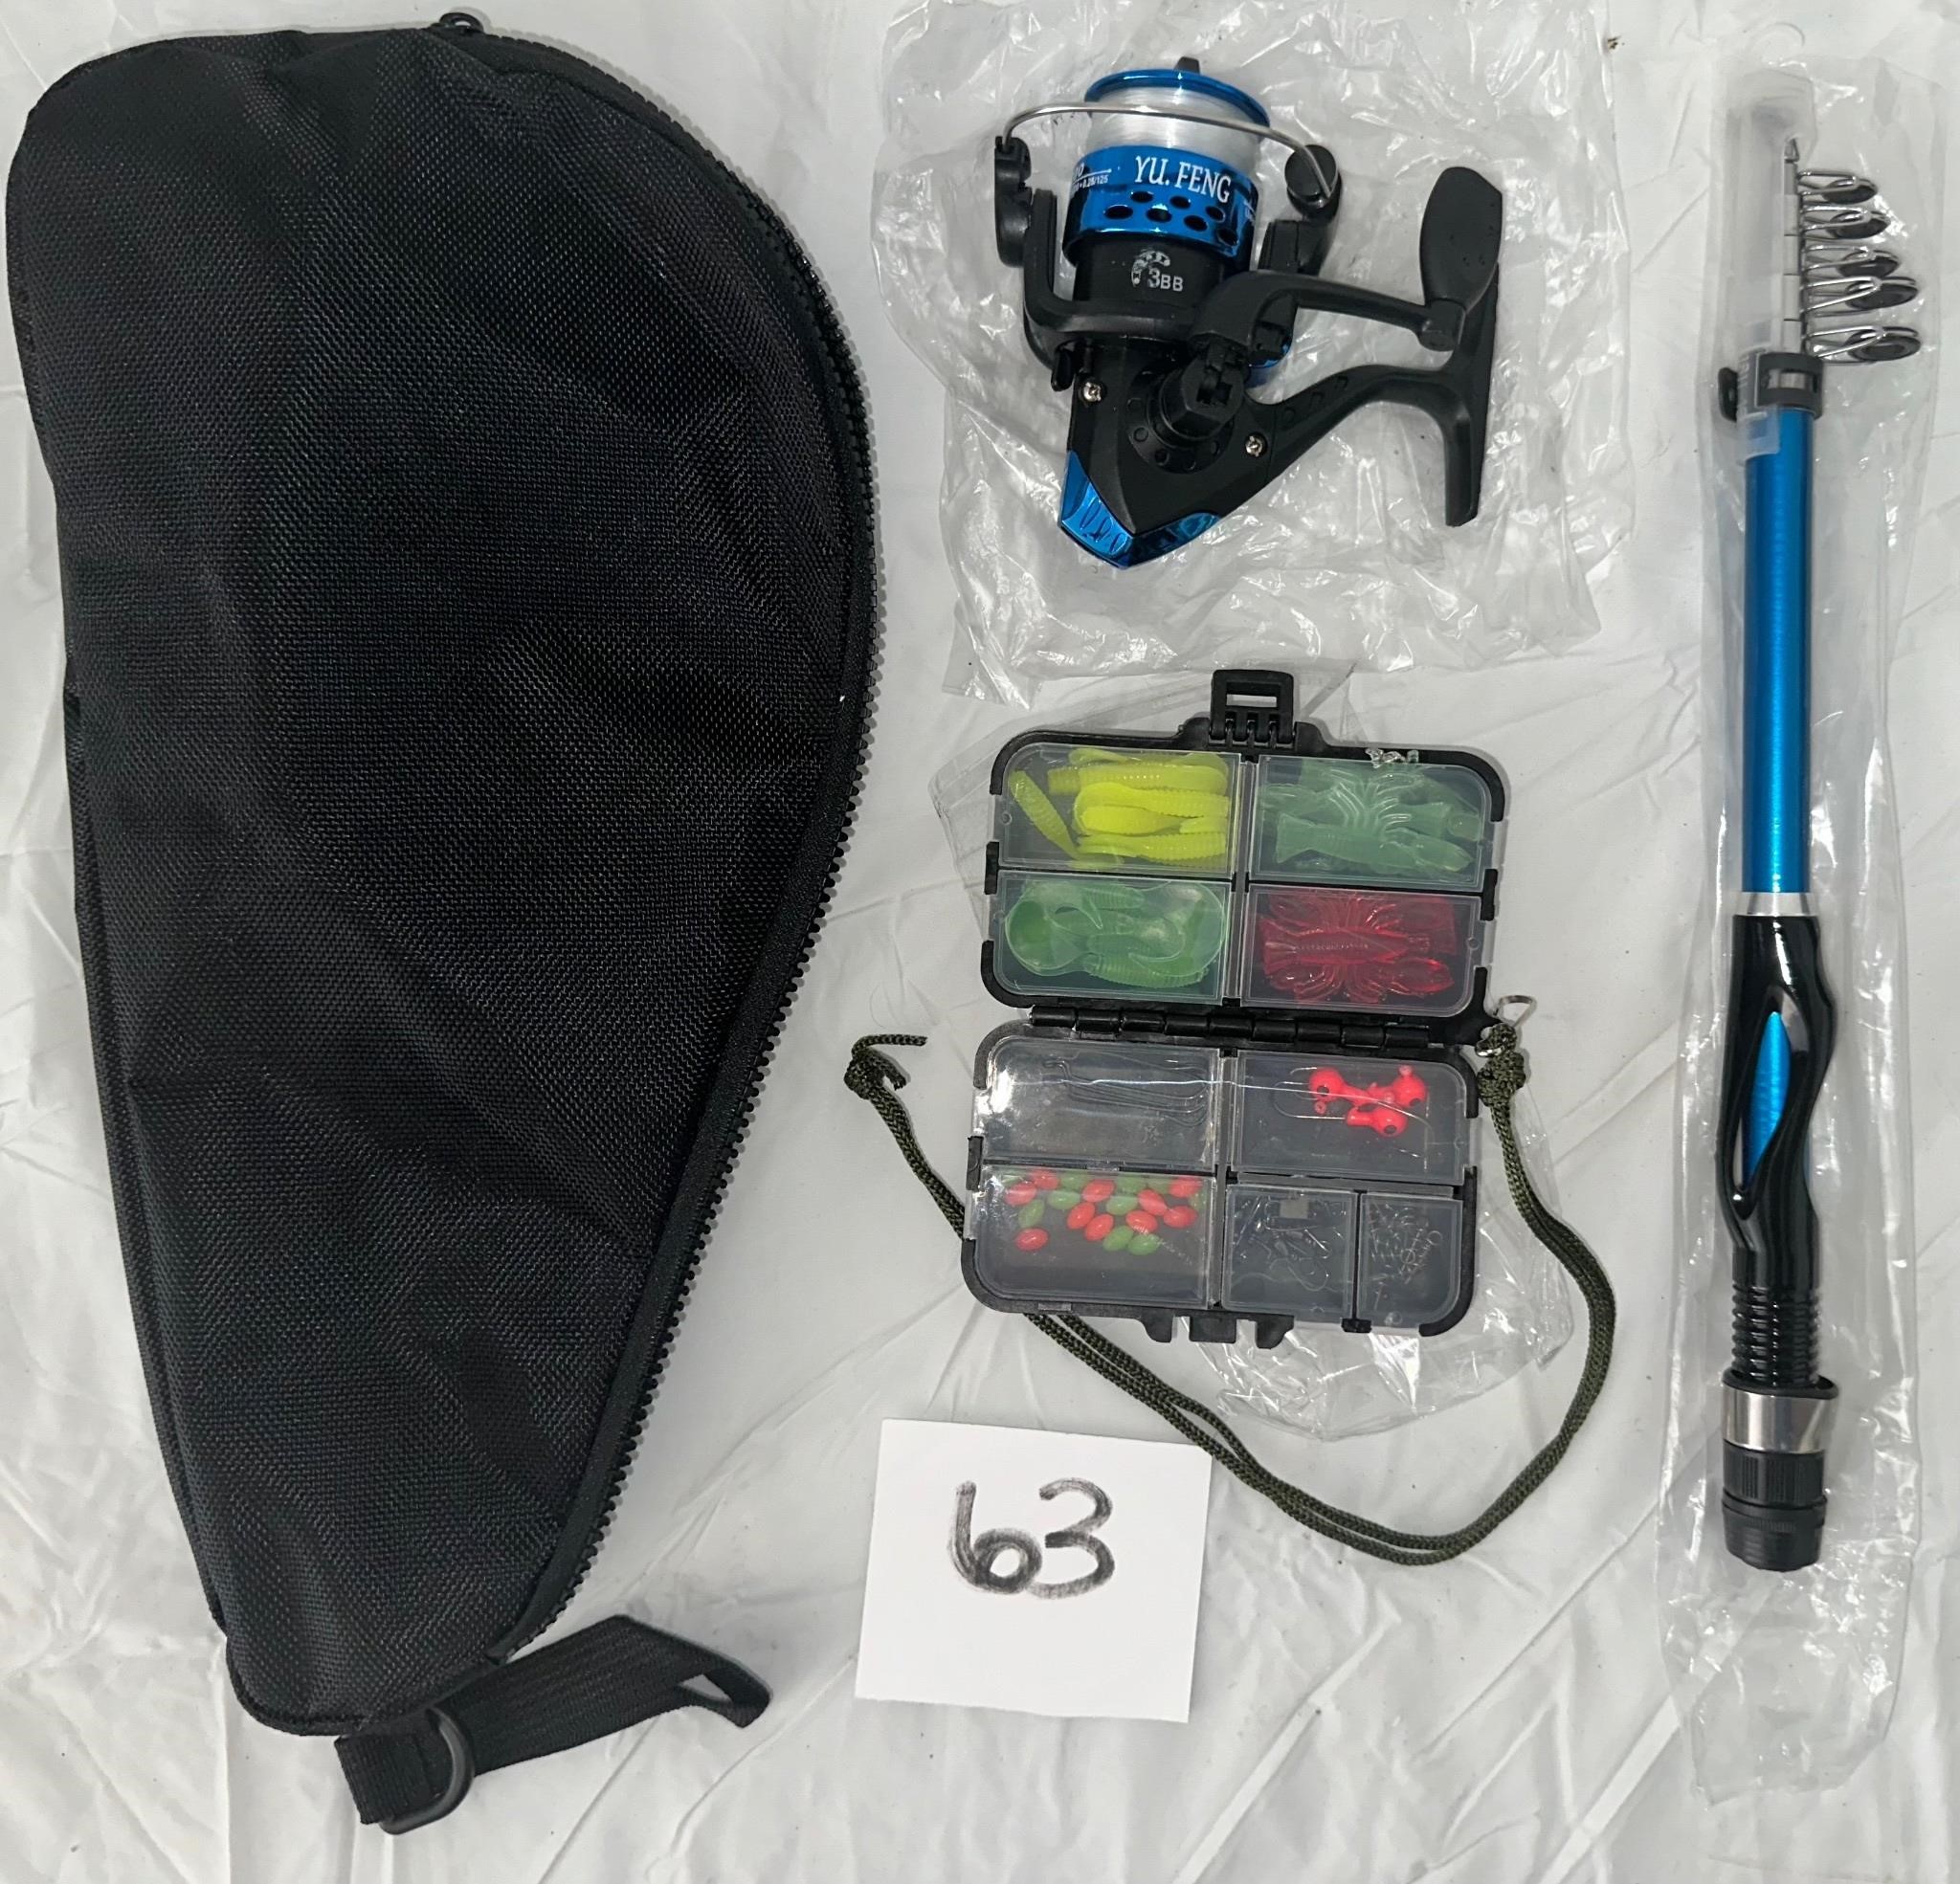 Compact Fishing Rod, Reel, Tackle, & Case